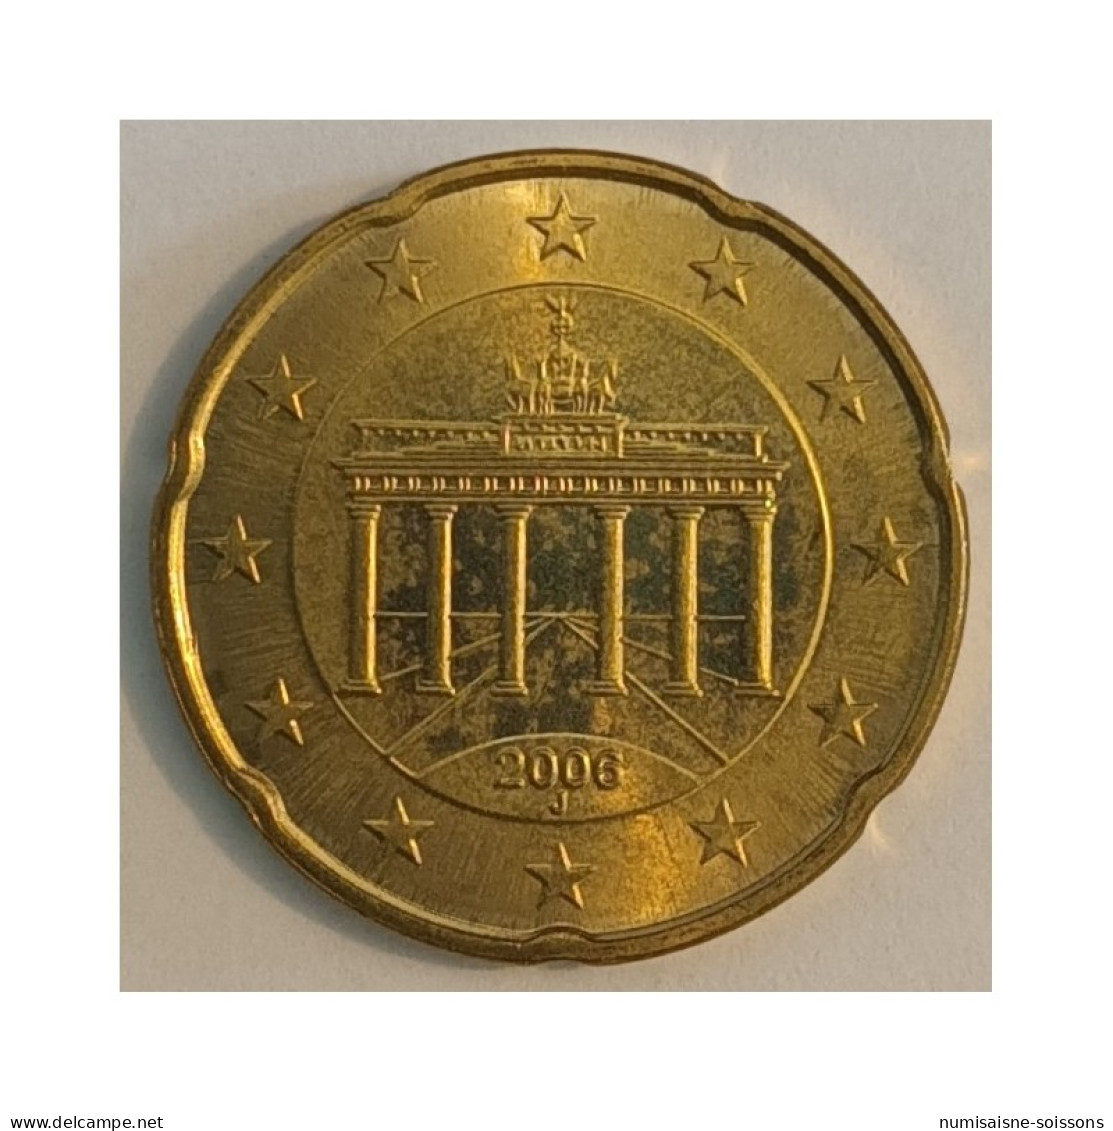 ALLEMAGNE - KM 211 - 20 CENT 2006 J - Hambourg - FDC - Germany